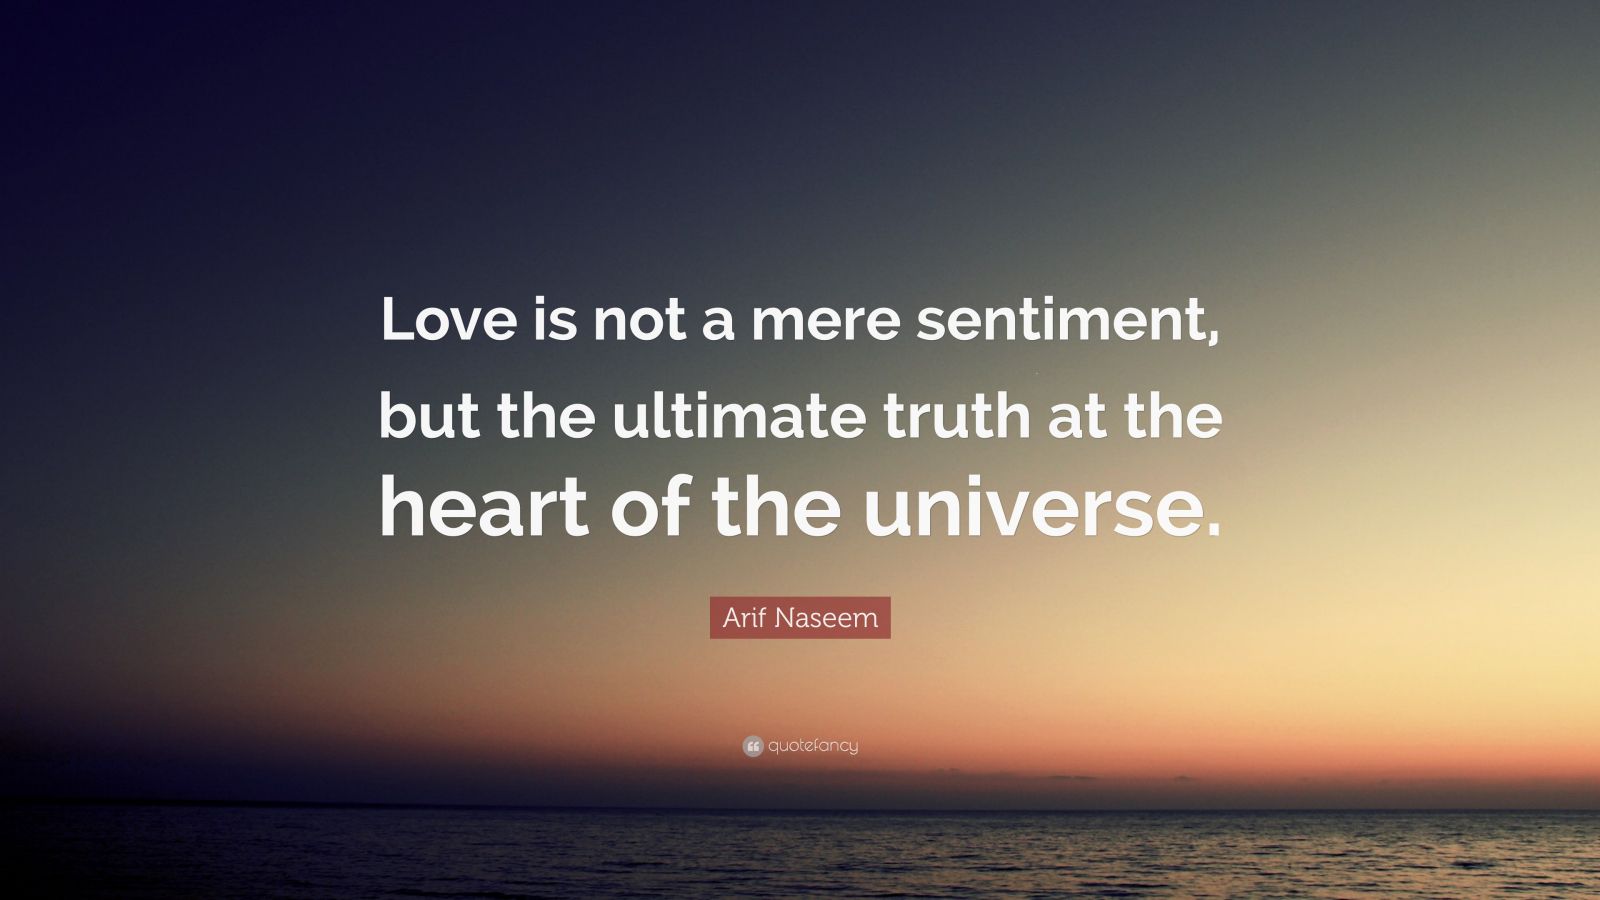 Arif Naseem Quote: “Love is not a mere sentiment, but the ultimate ...